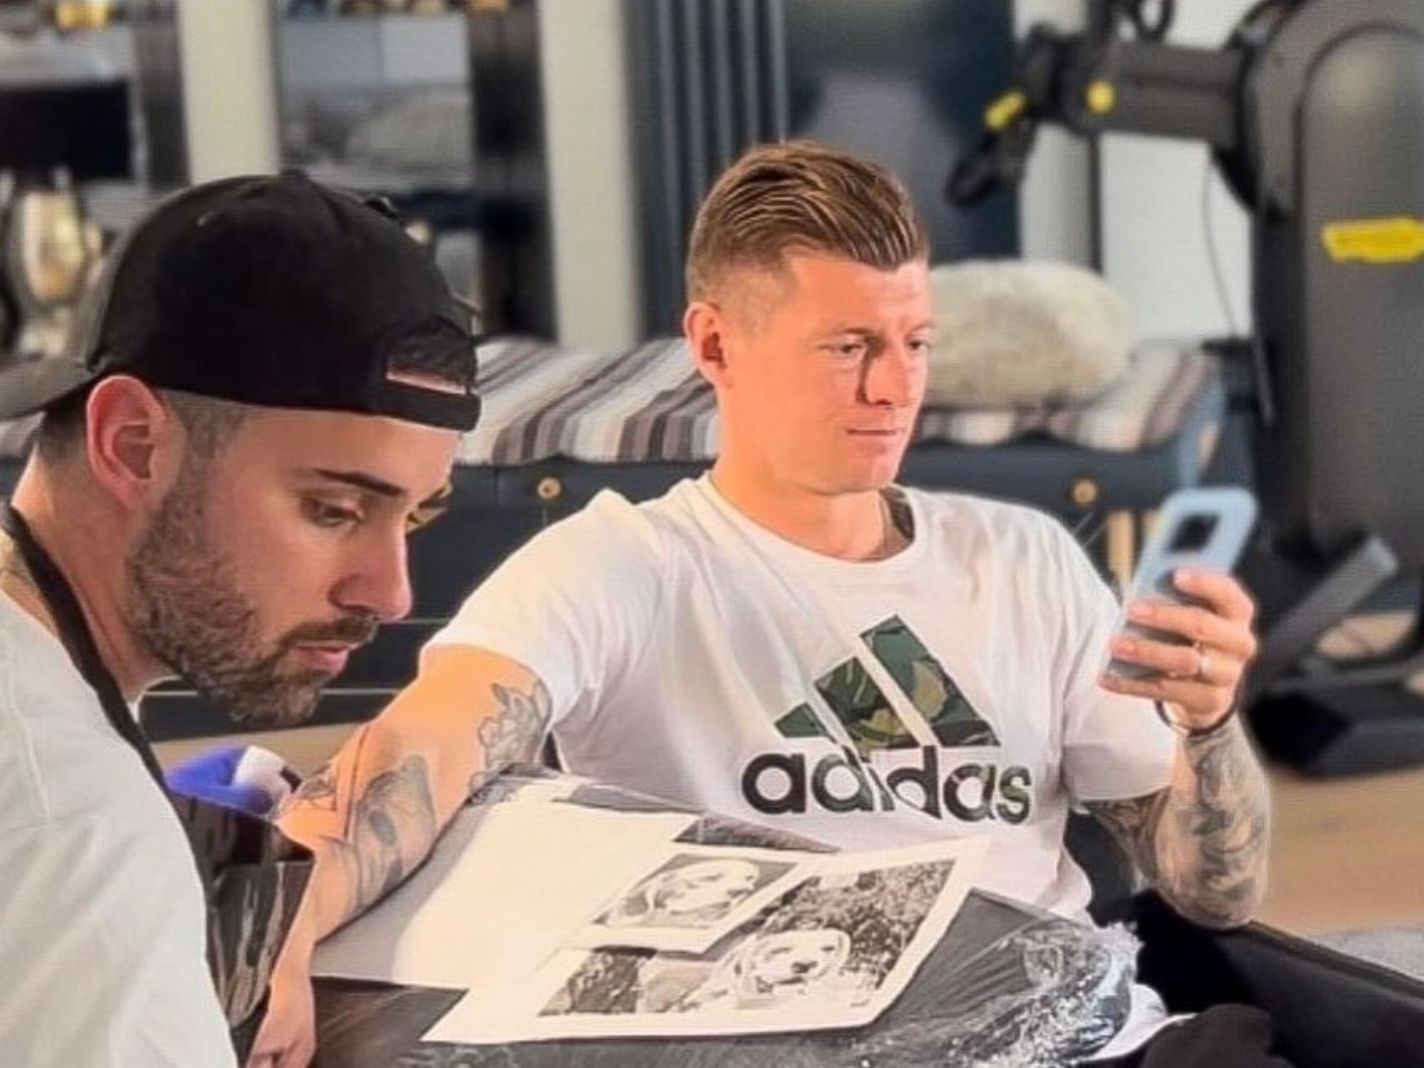 Look: Toni Kroos Adds Another Family Member to His Tattoo Collection